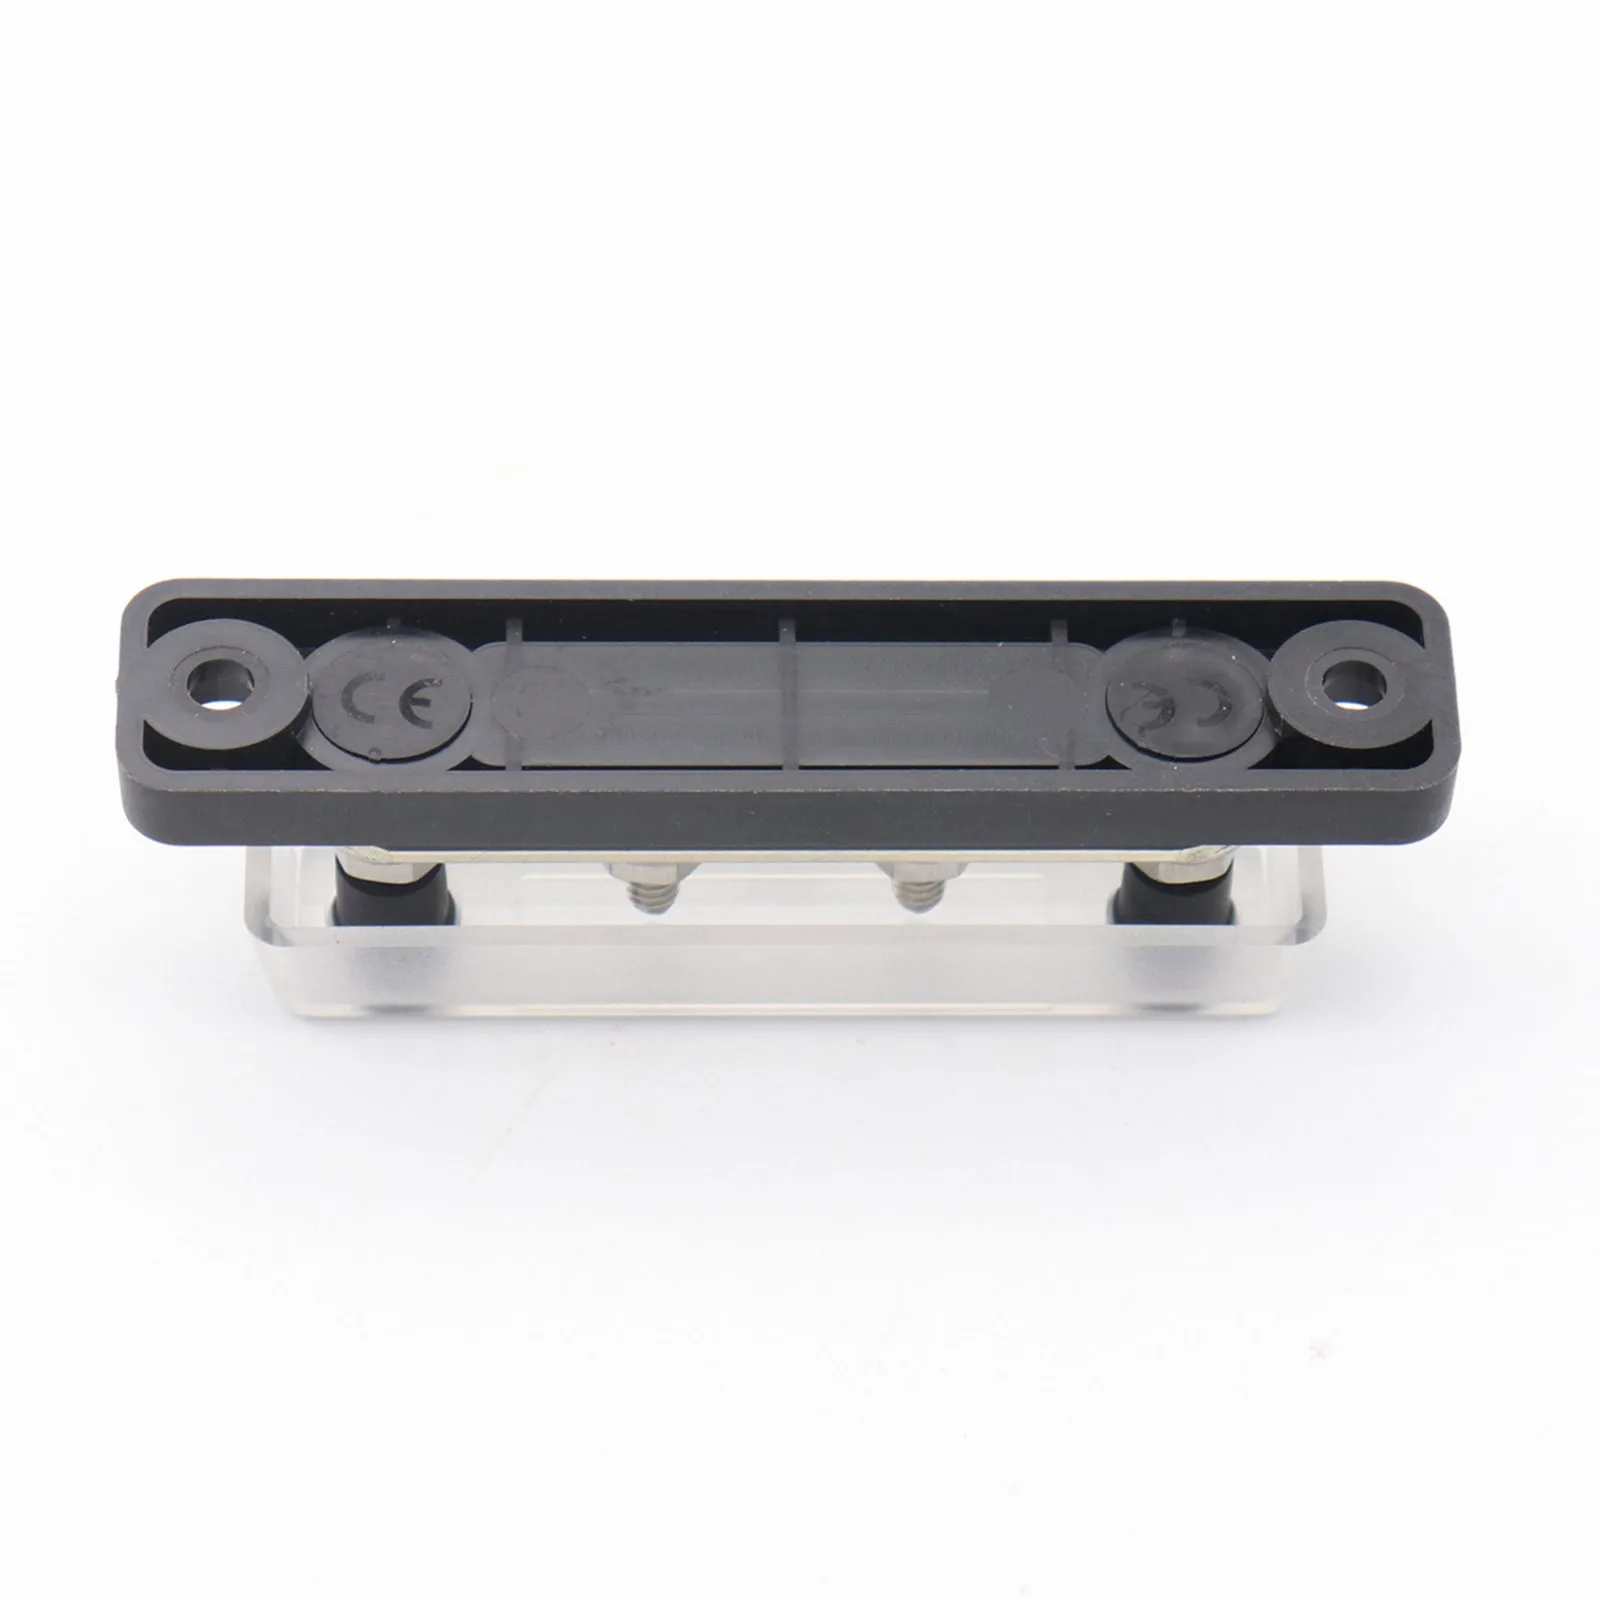 Auto Marine Boat 4-Post Bus Bar Terminal Power and Ground Junction Distribution Block, Black